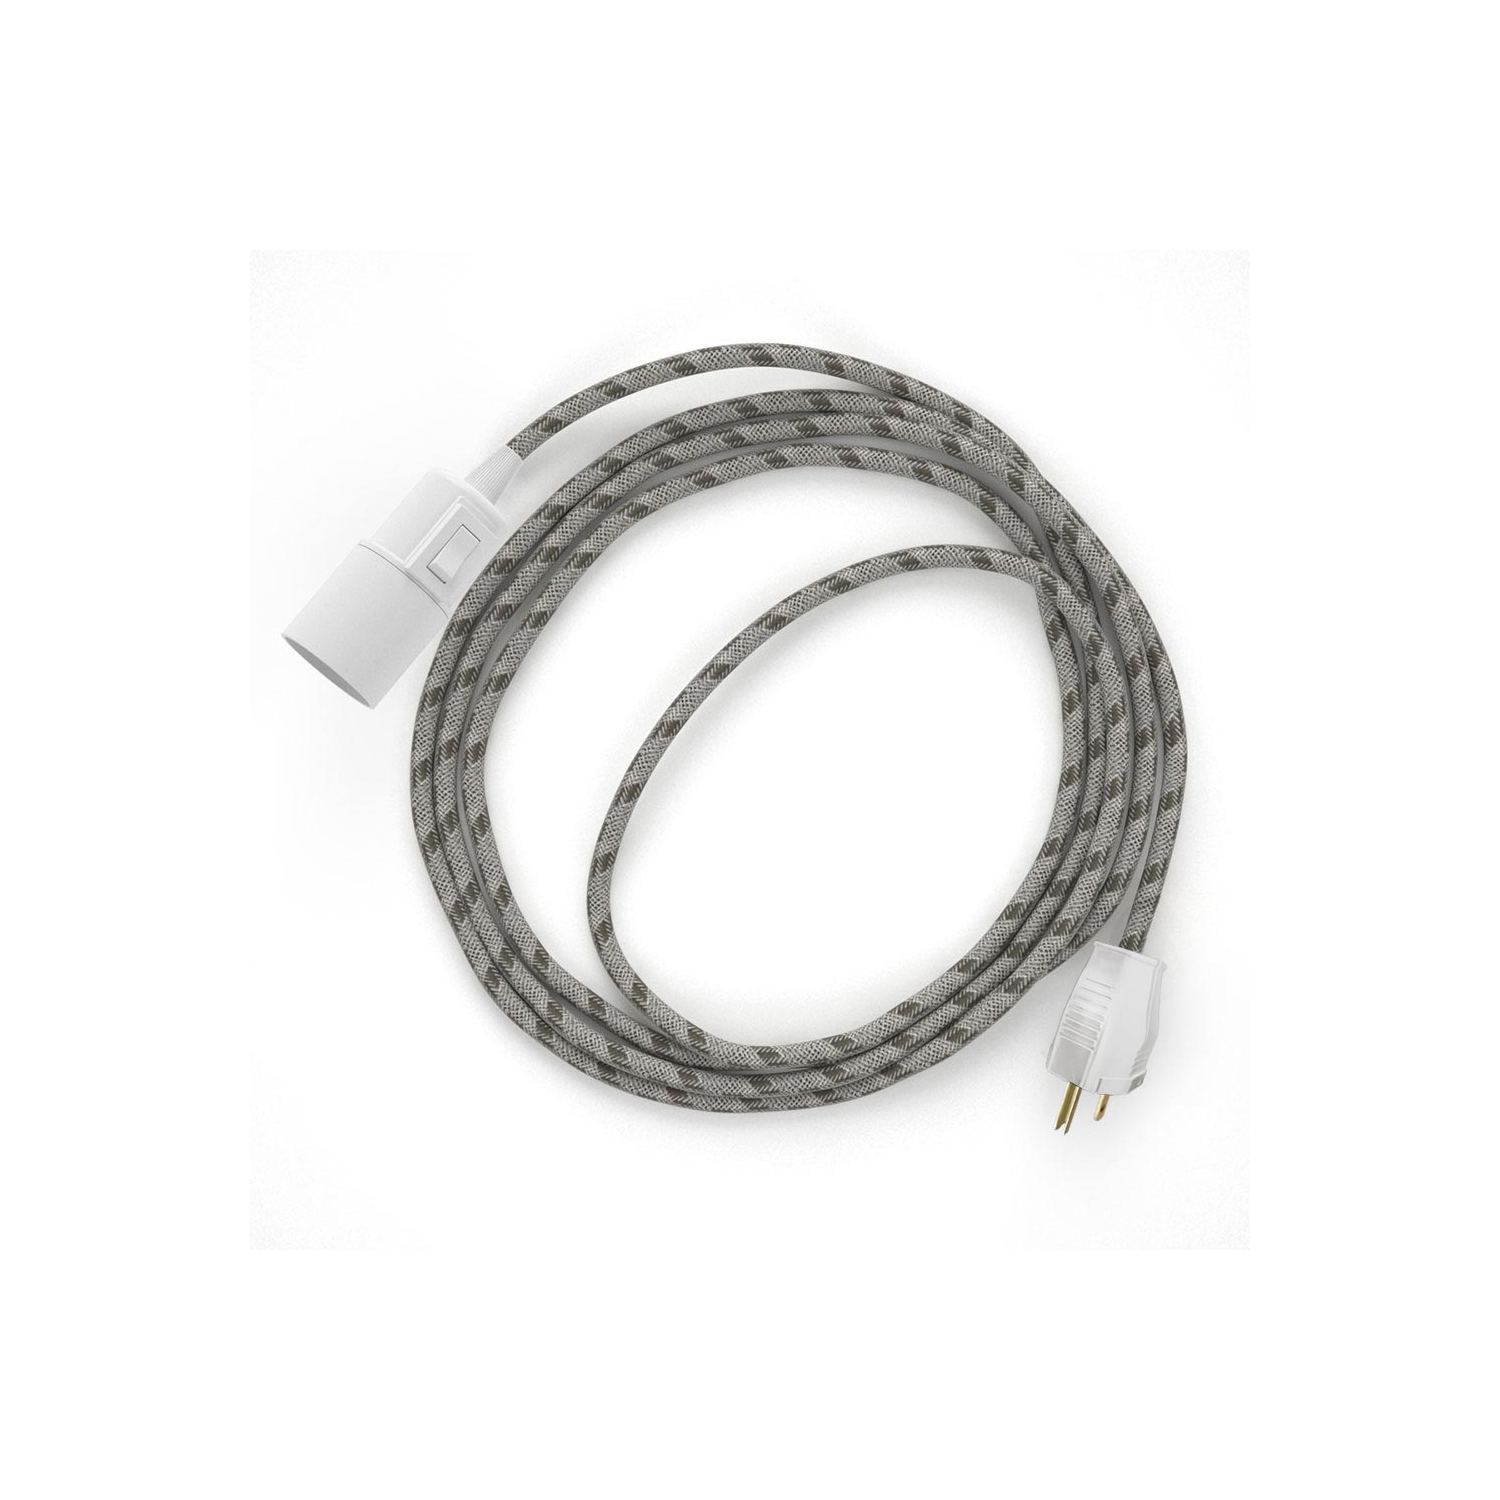 Plug-in Pendant with switch on socket | RD53 Natural & Brown Linen Stripe